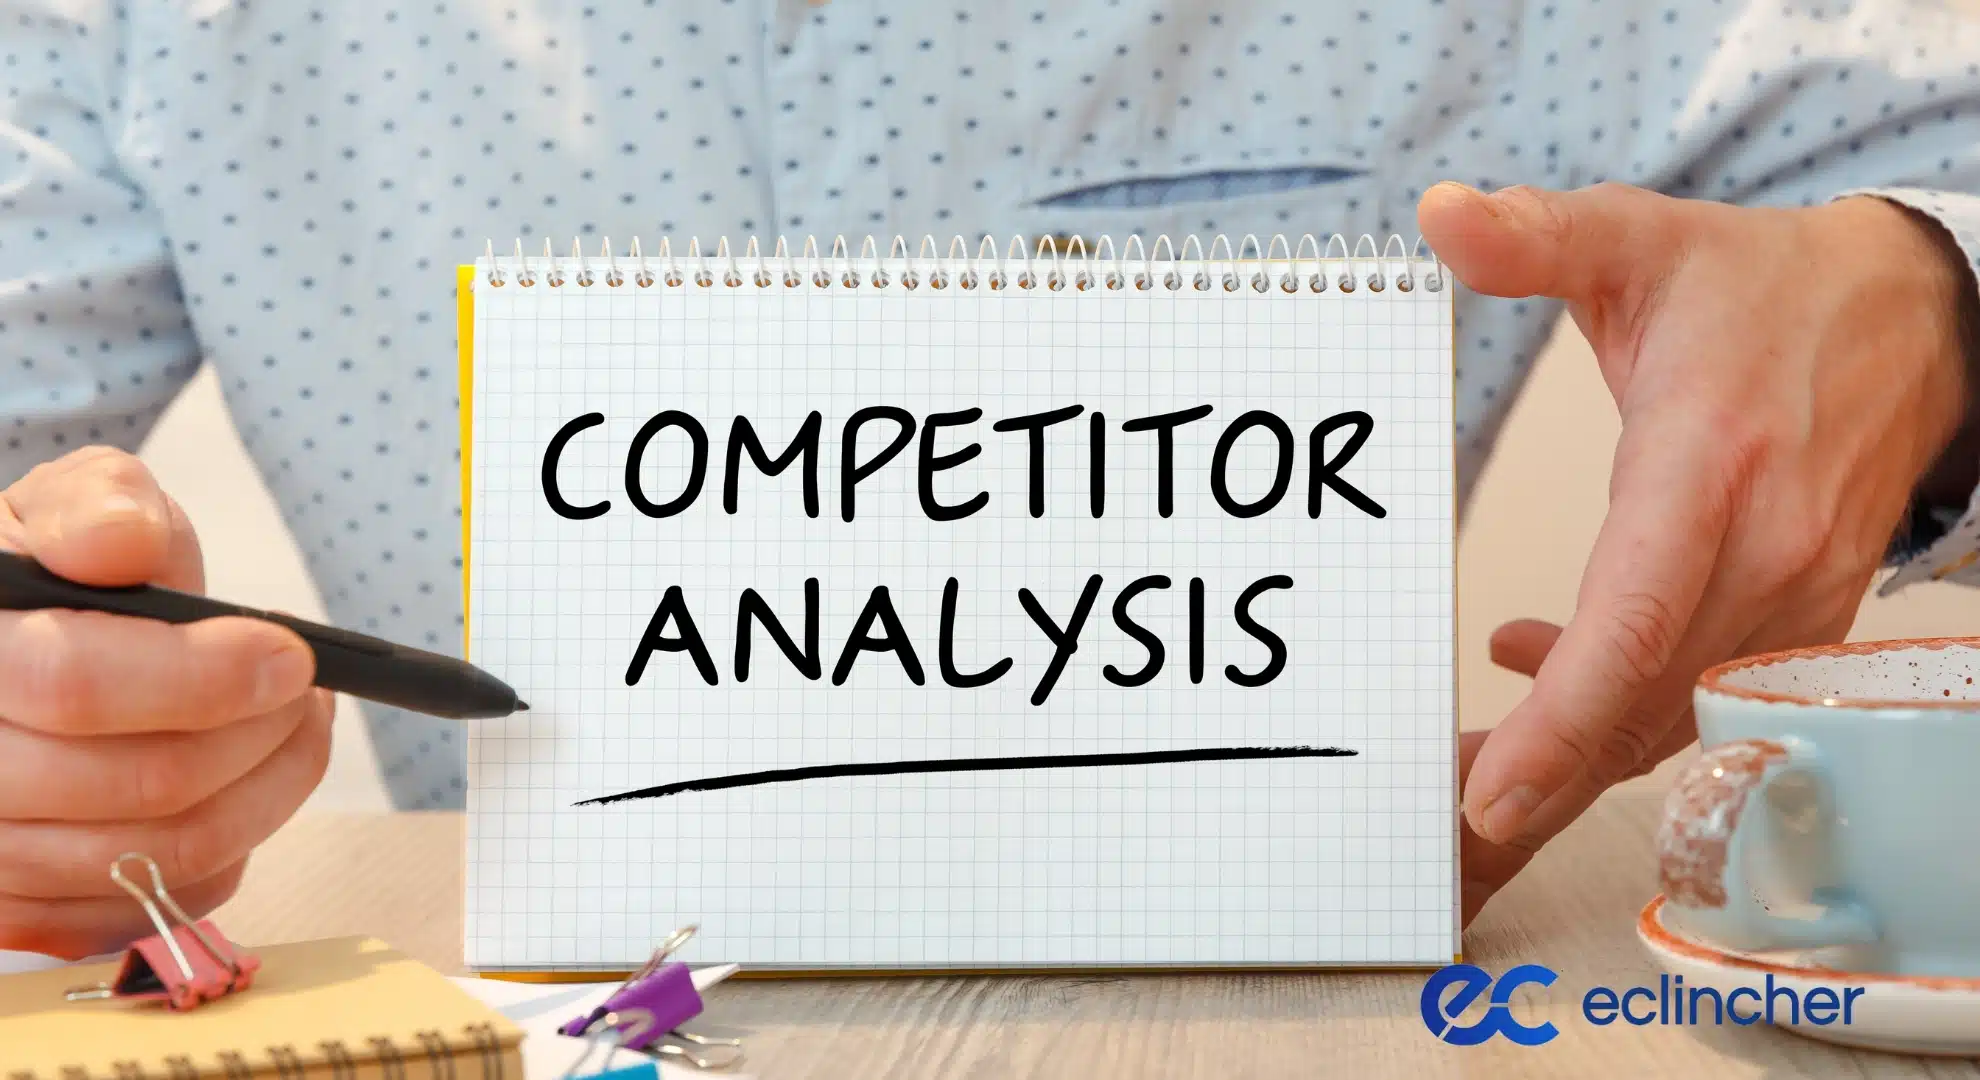 Benchmark and Compare Against Competitors